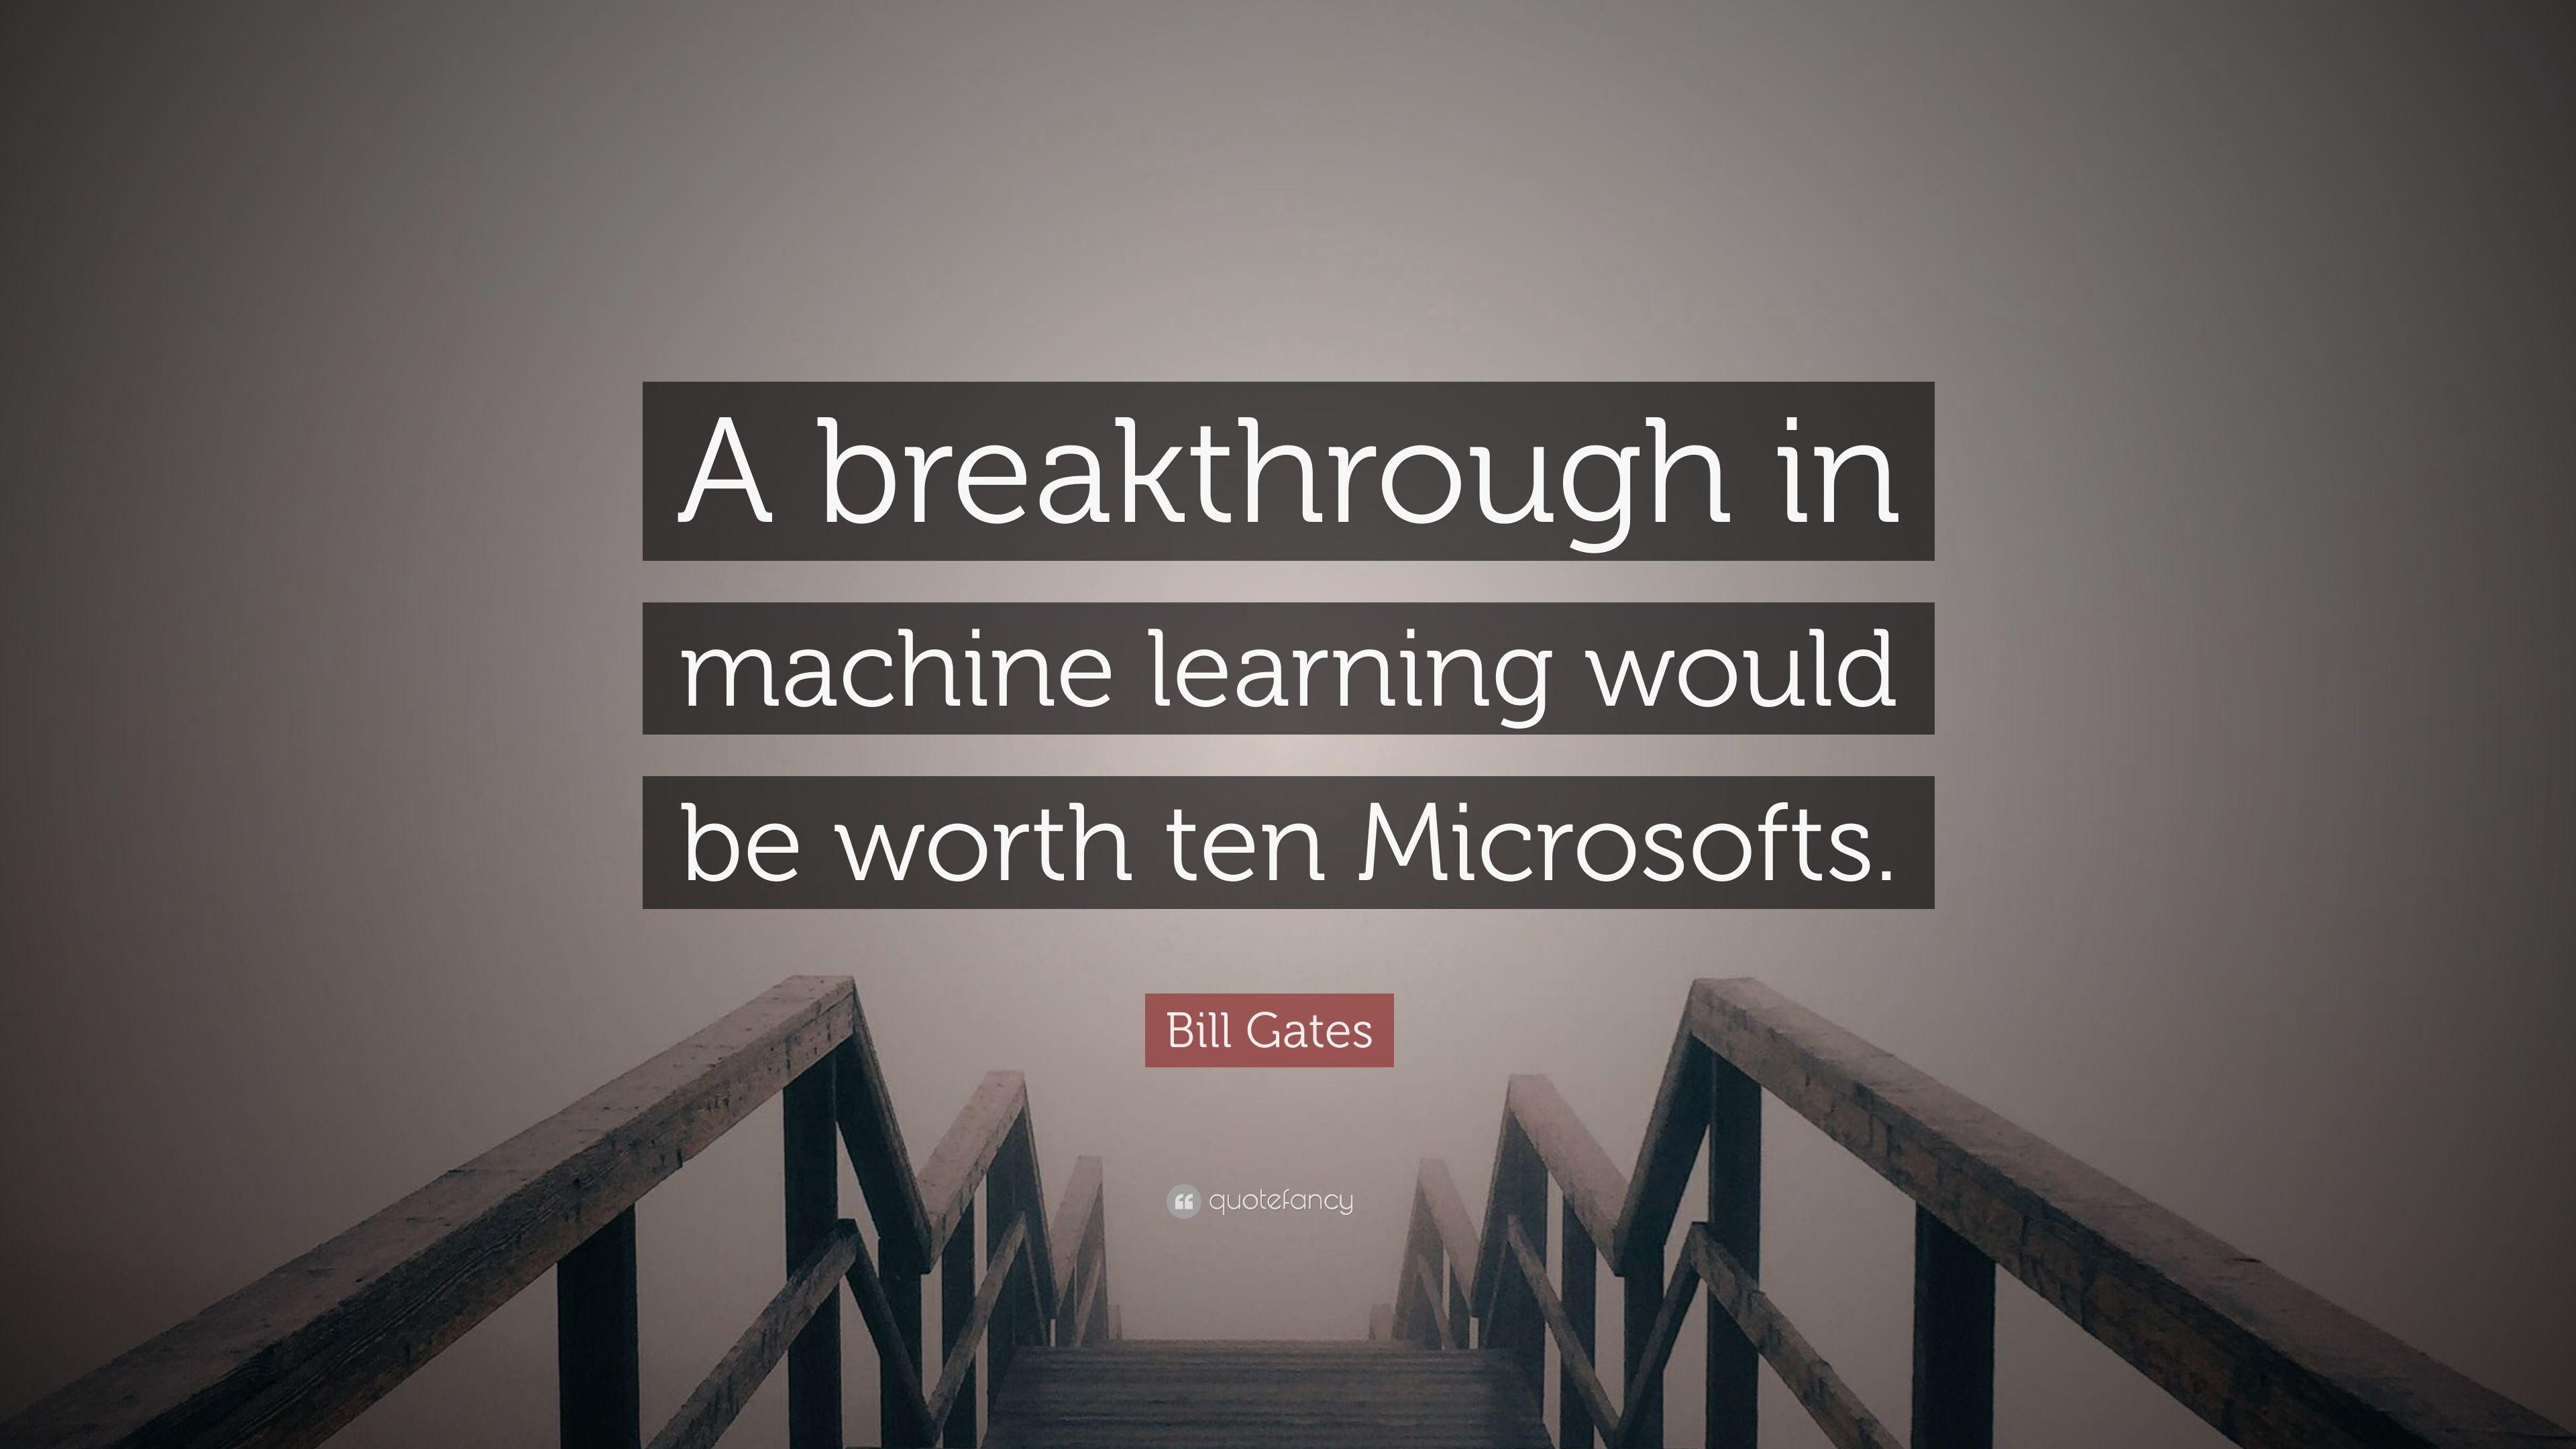 Bill Gates Quote: “A breakthrough in machine learning would be worth